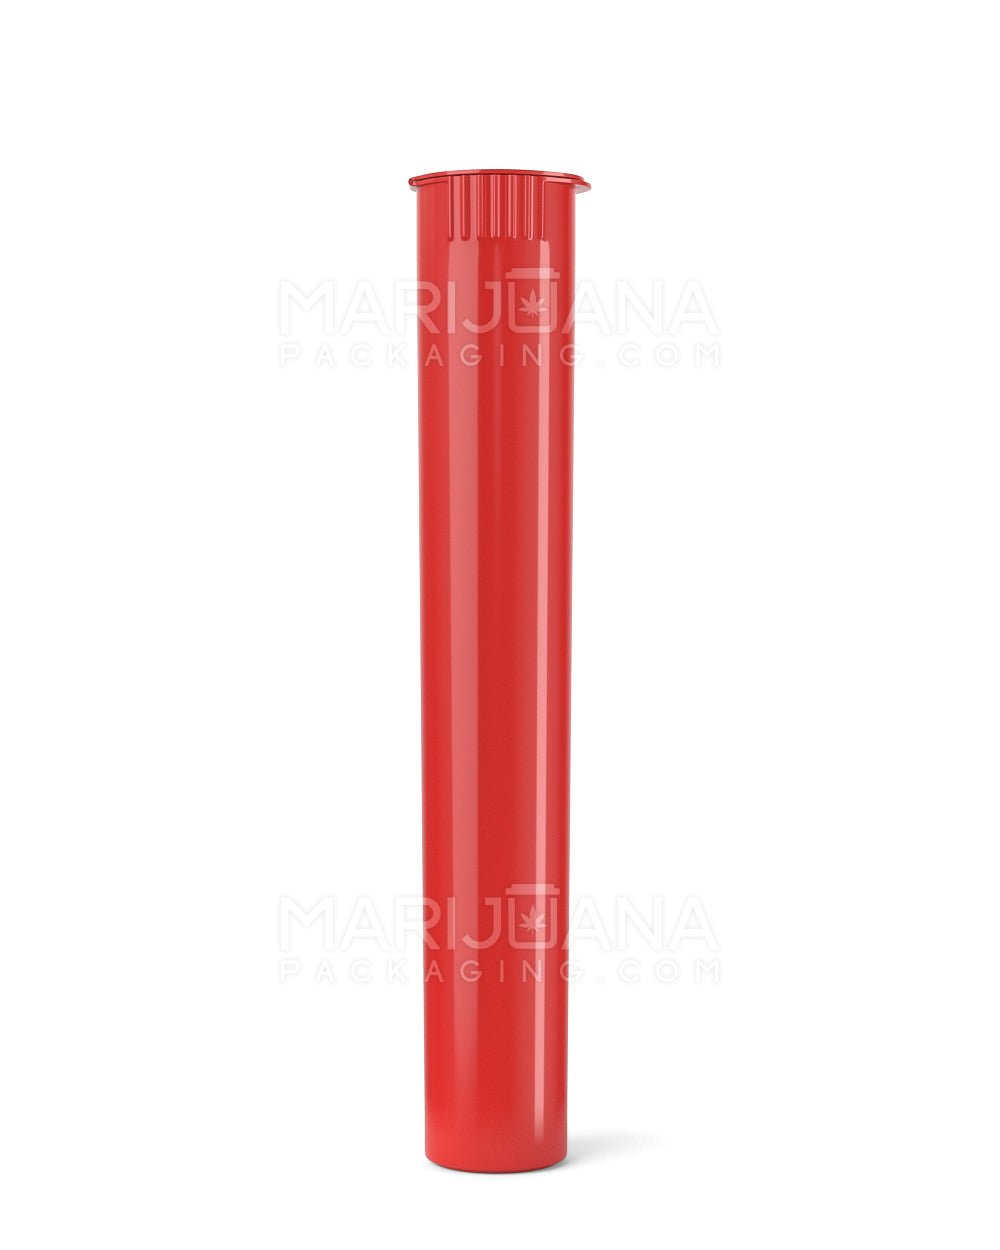 Child Resistant | King Size Pop Top Opaque Plastic Pre-Roll Tubes | 116mm - Red - 1000 Count - 2